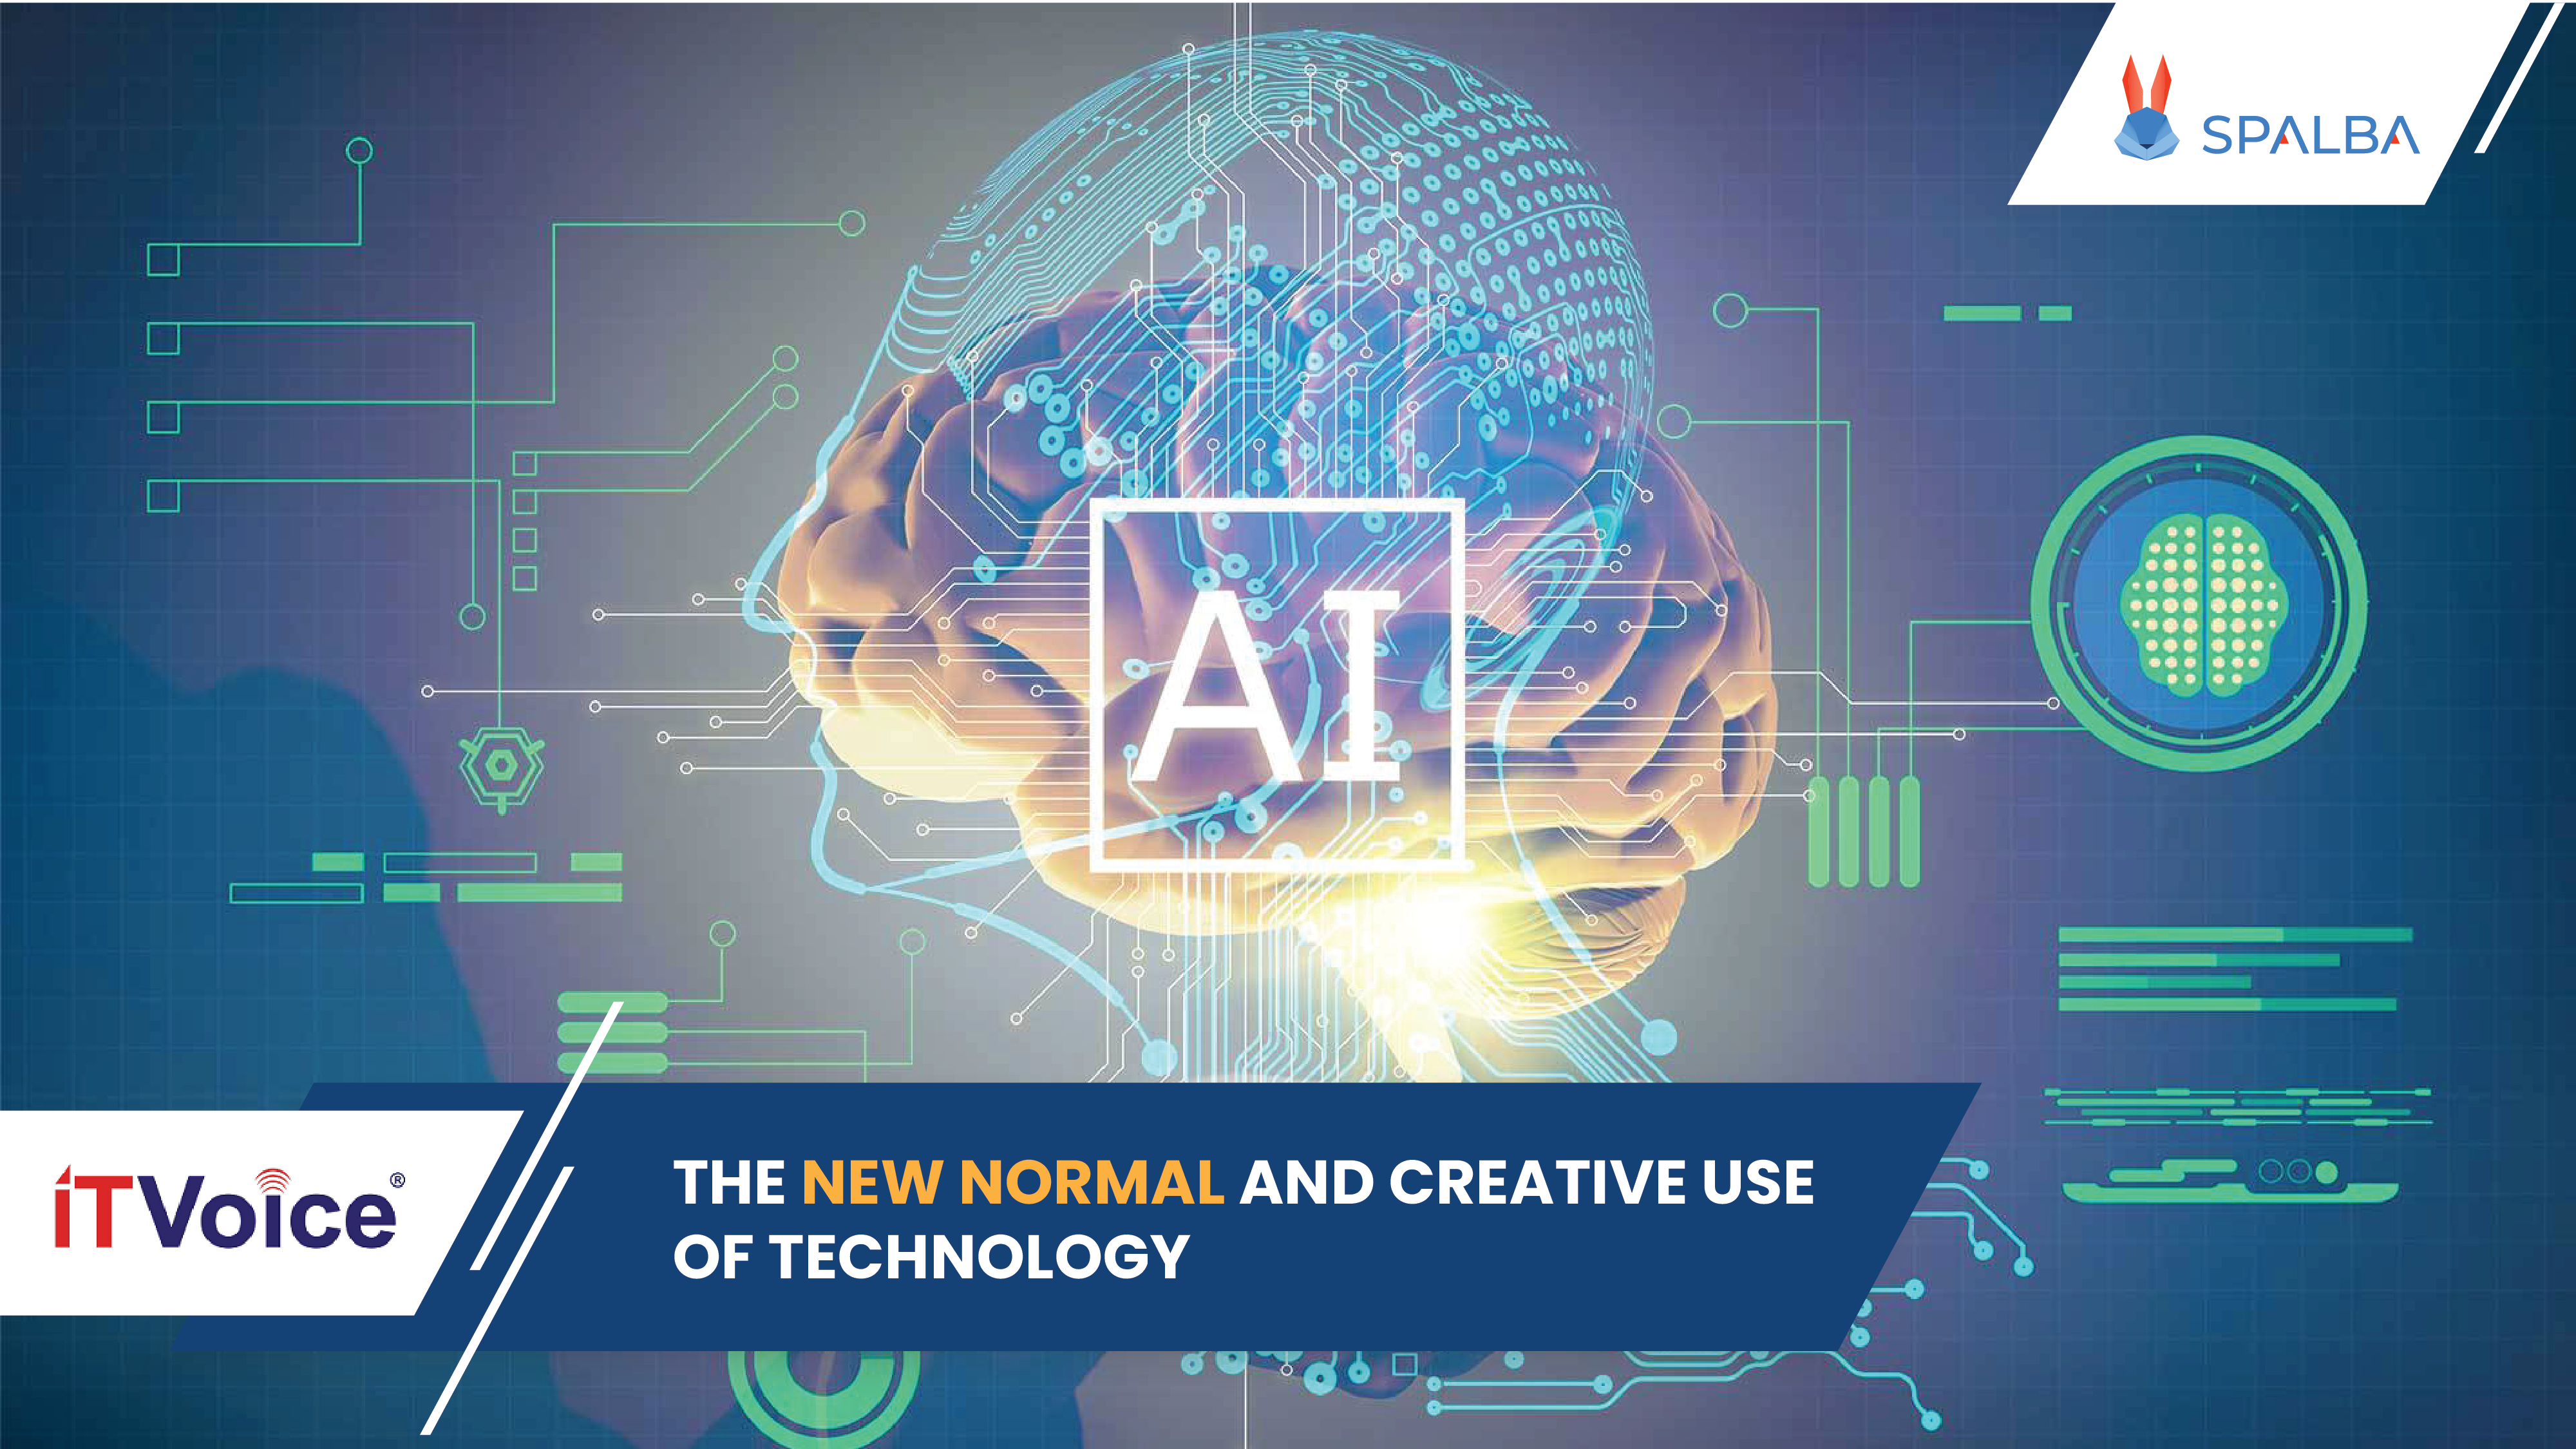 The ‘New Normal’ and Creative uses of technology in 2021